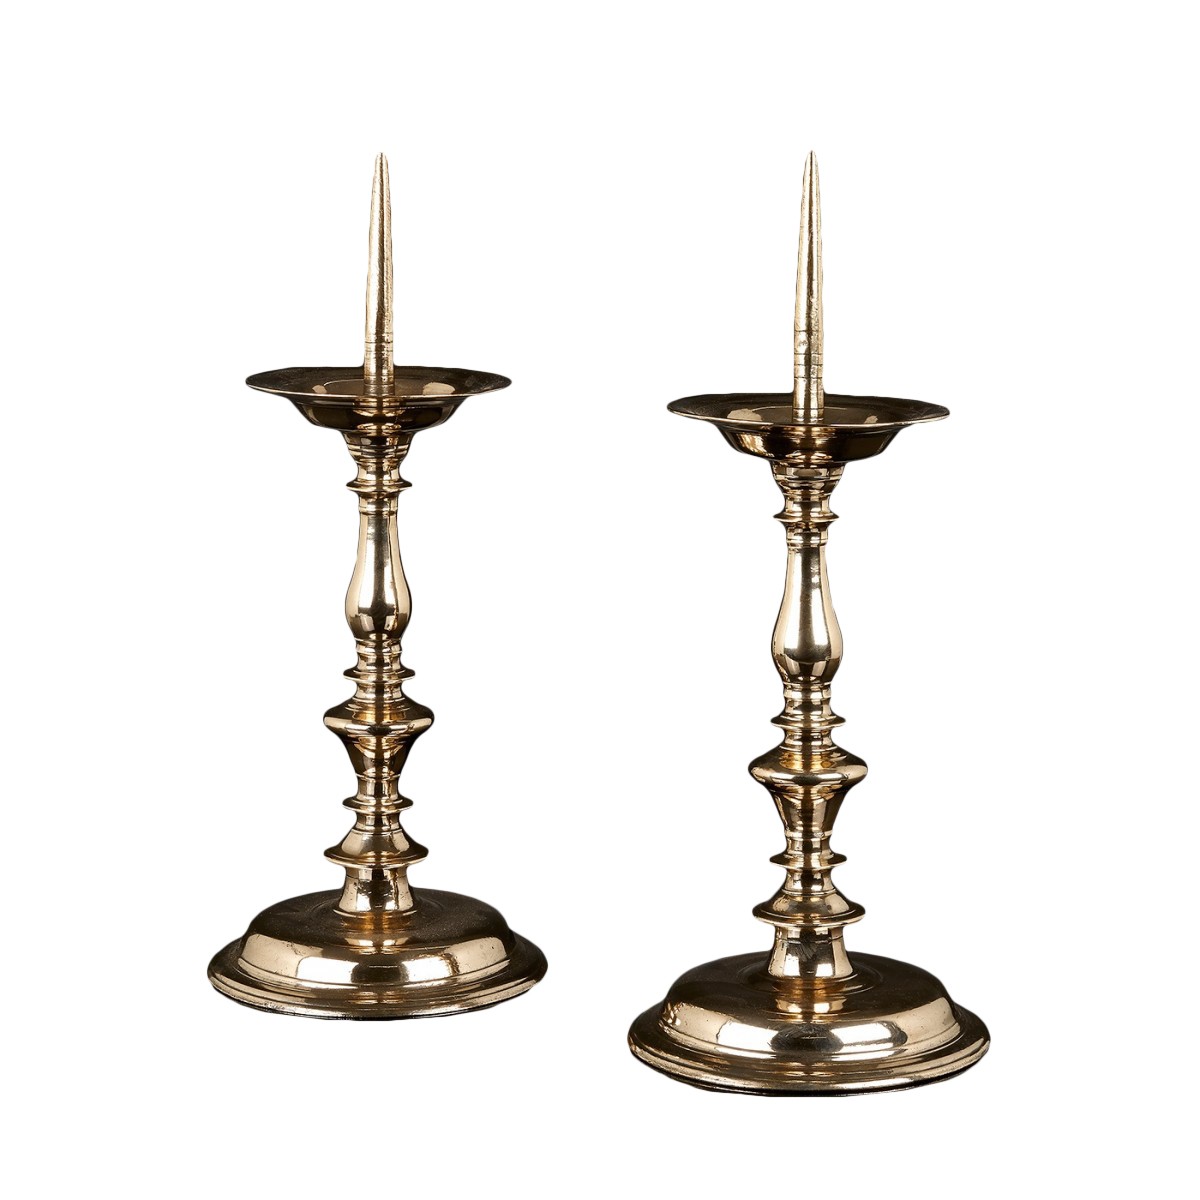 A Pair Of Brass Pricket Candle Sticks, 18th Century.